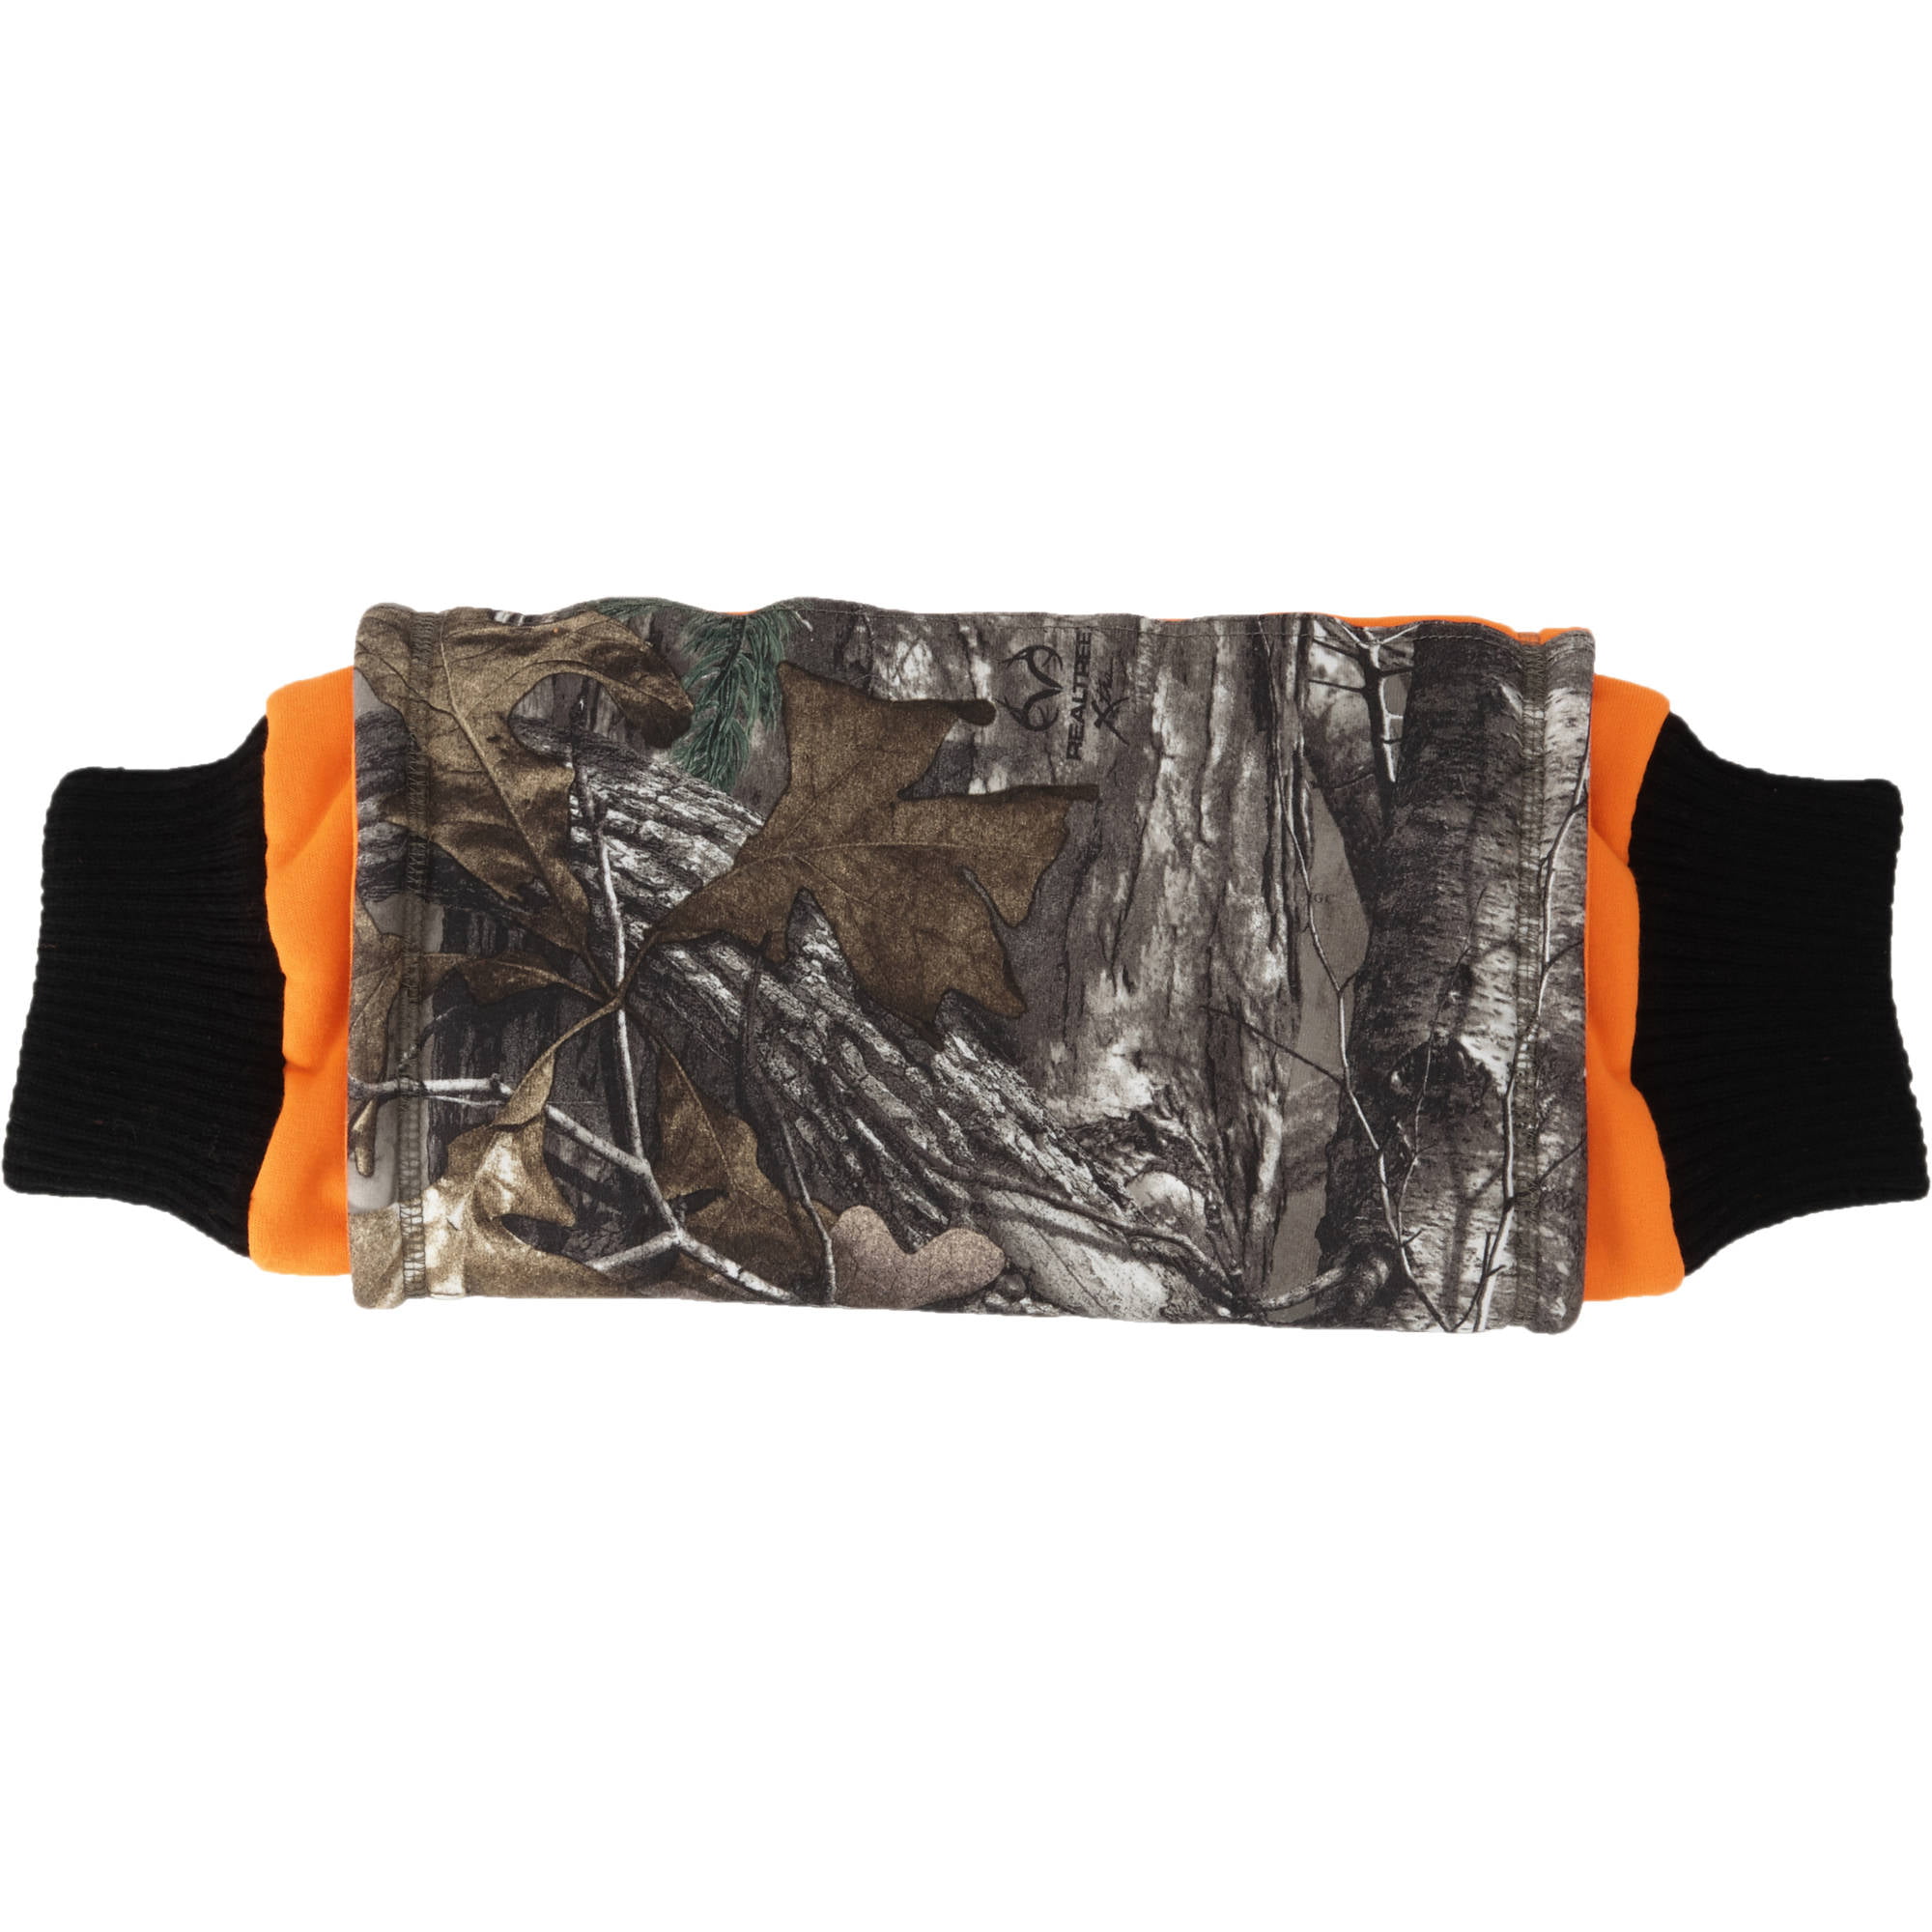 Game Winner ATV Hand Warmer Protectors REAL TREE Camouflaged Hunting Camping 